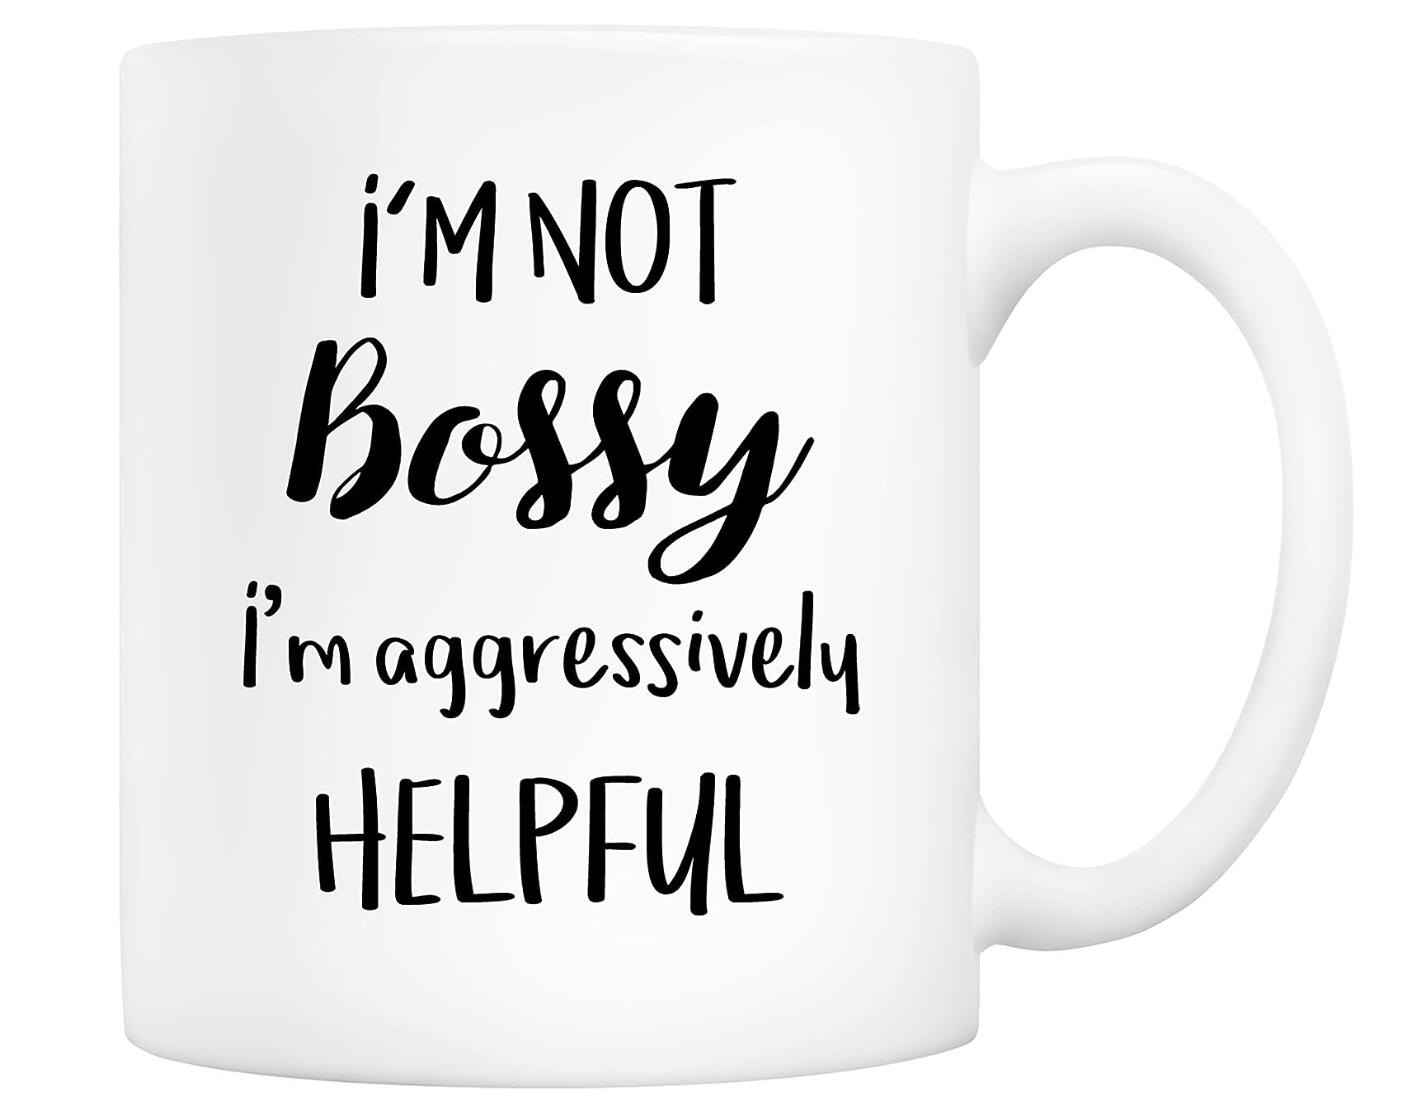 I’m Not Bossy I’m Aggressively Helpful Coffee Mug Gift Cup for Myself